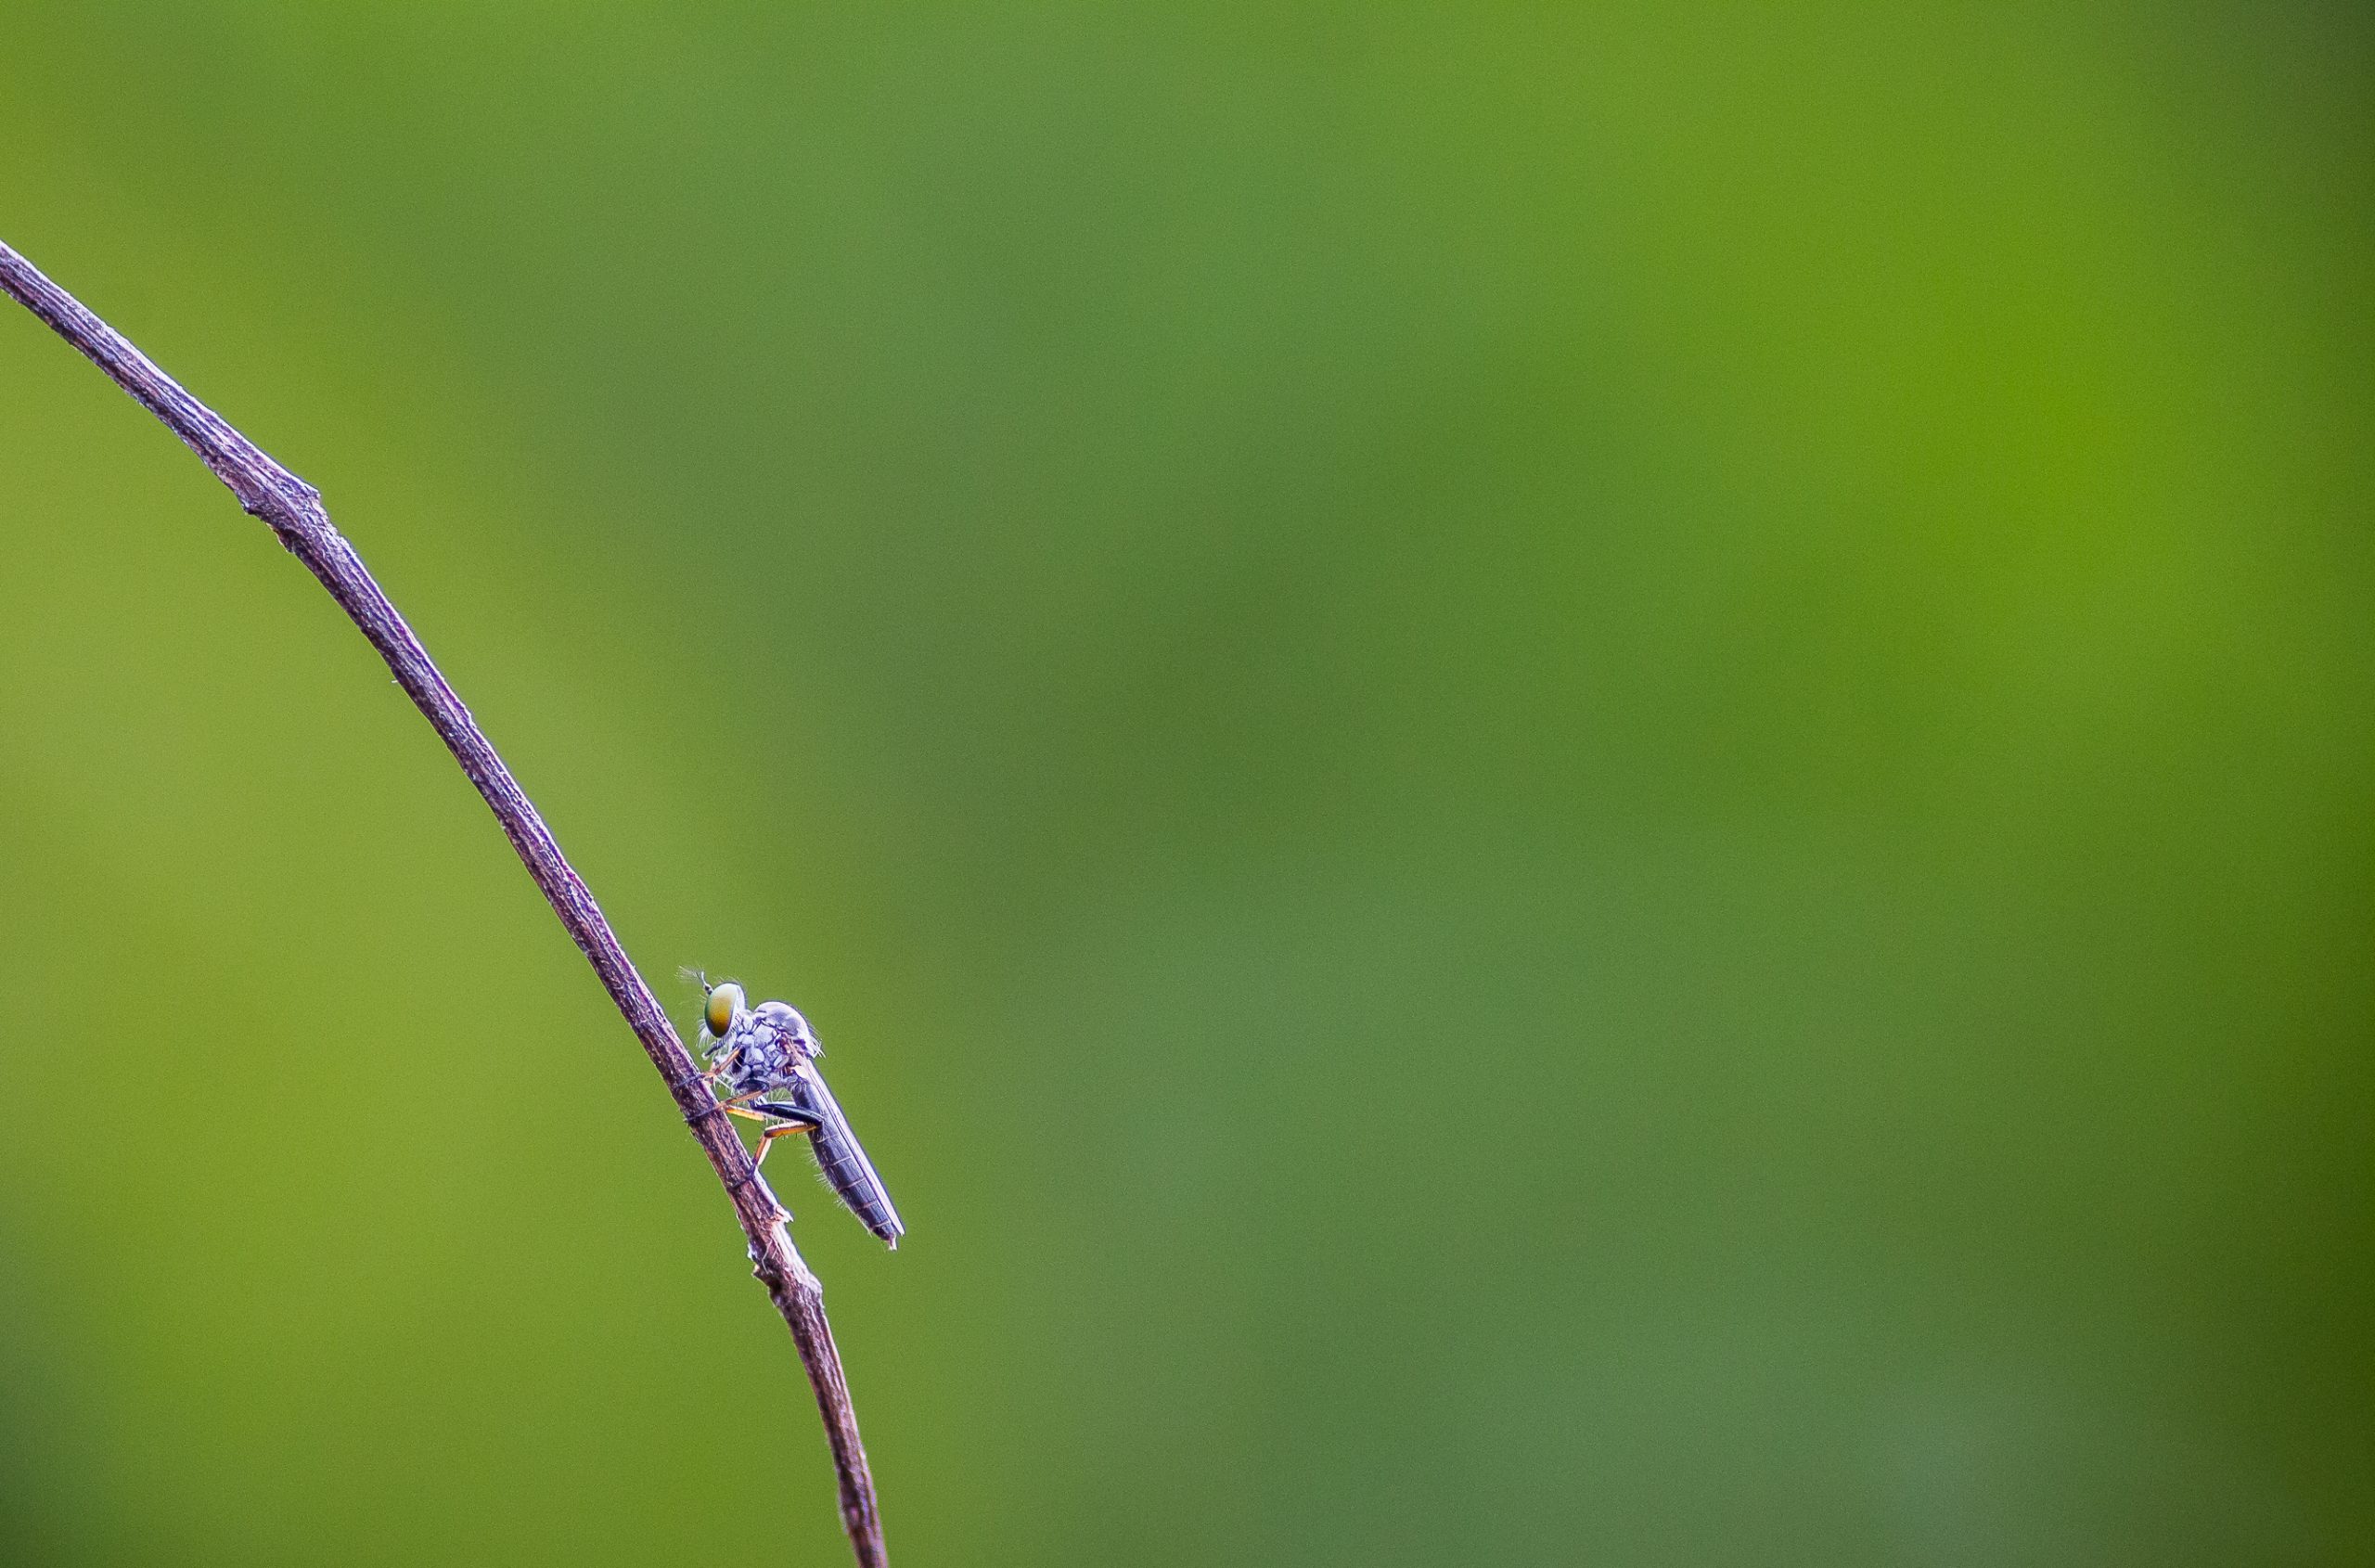 Insect sitting on plant stem